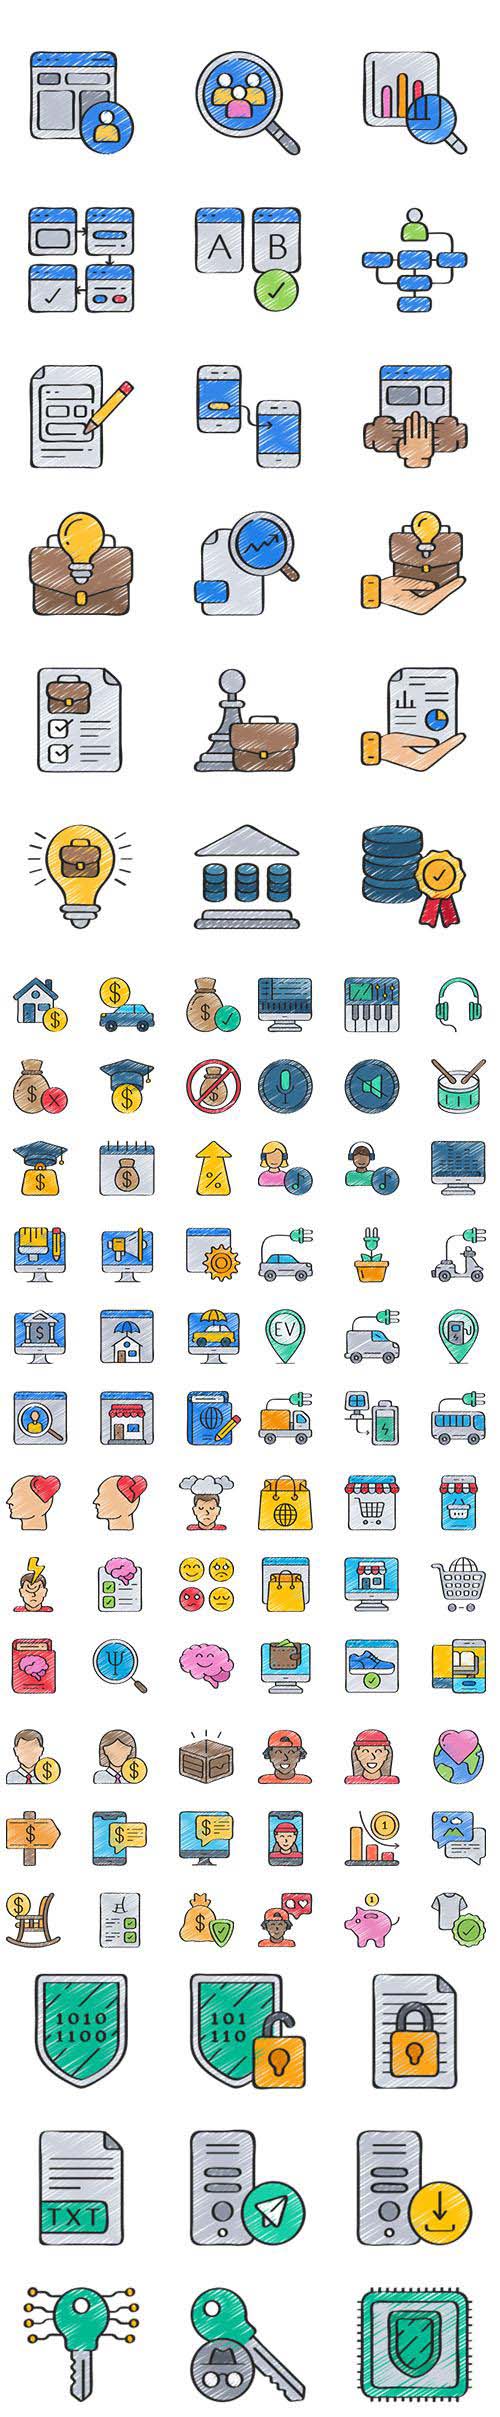 Big Icons Pack in 5 styles (Flat, Outline, Solid, Sketchy, Soft-Fill)